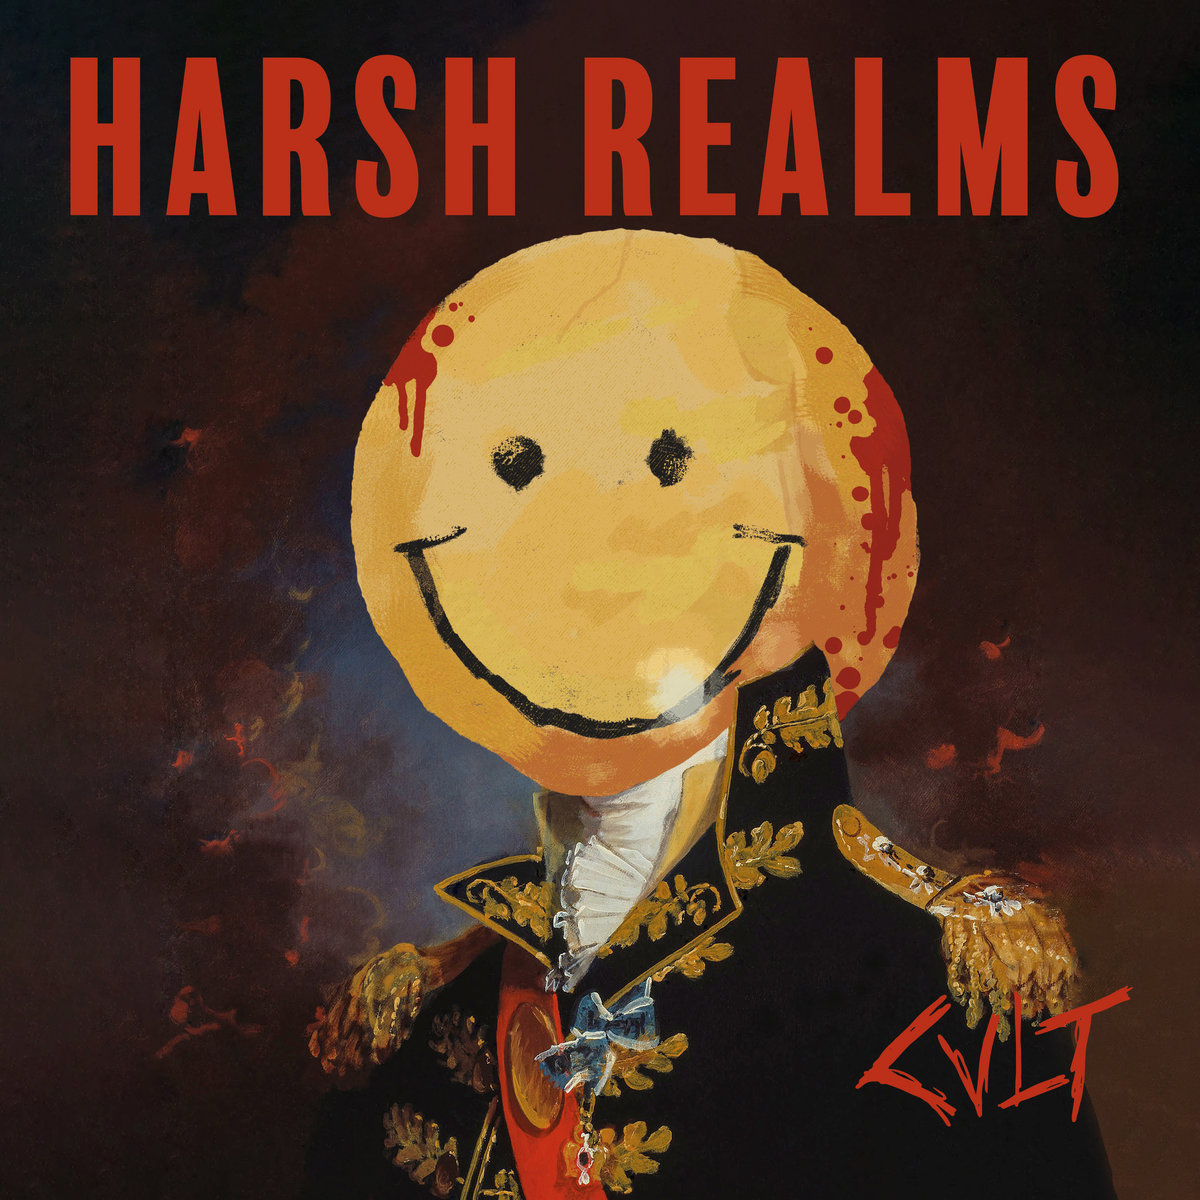 Harsh Realms – Cvlt LP Stoked to announce that after almost 9 years Harsh Realms are back with their second full length called "CVLT". 13 brand new songs of some quality punkrock!